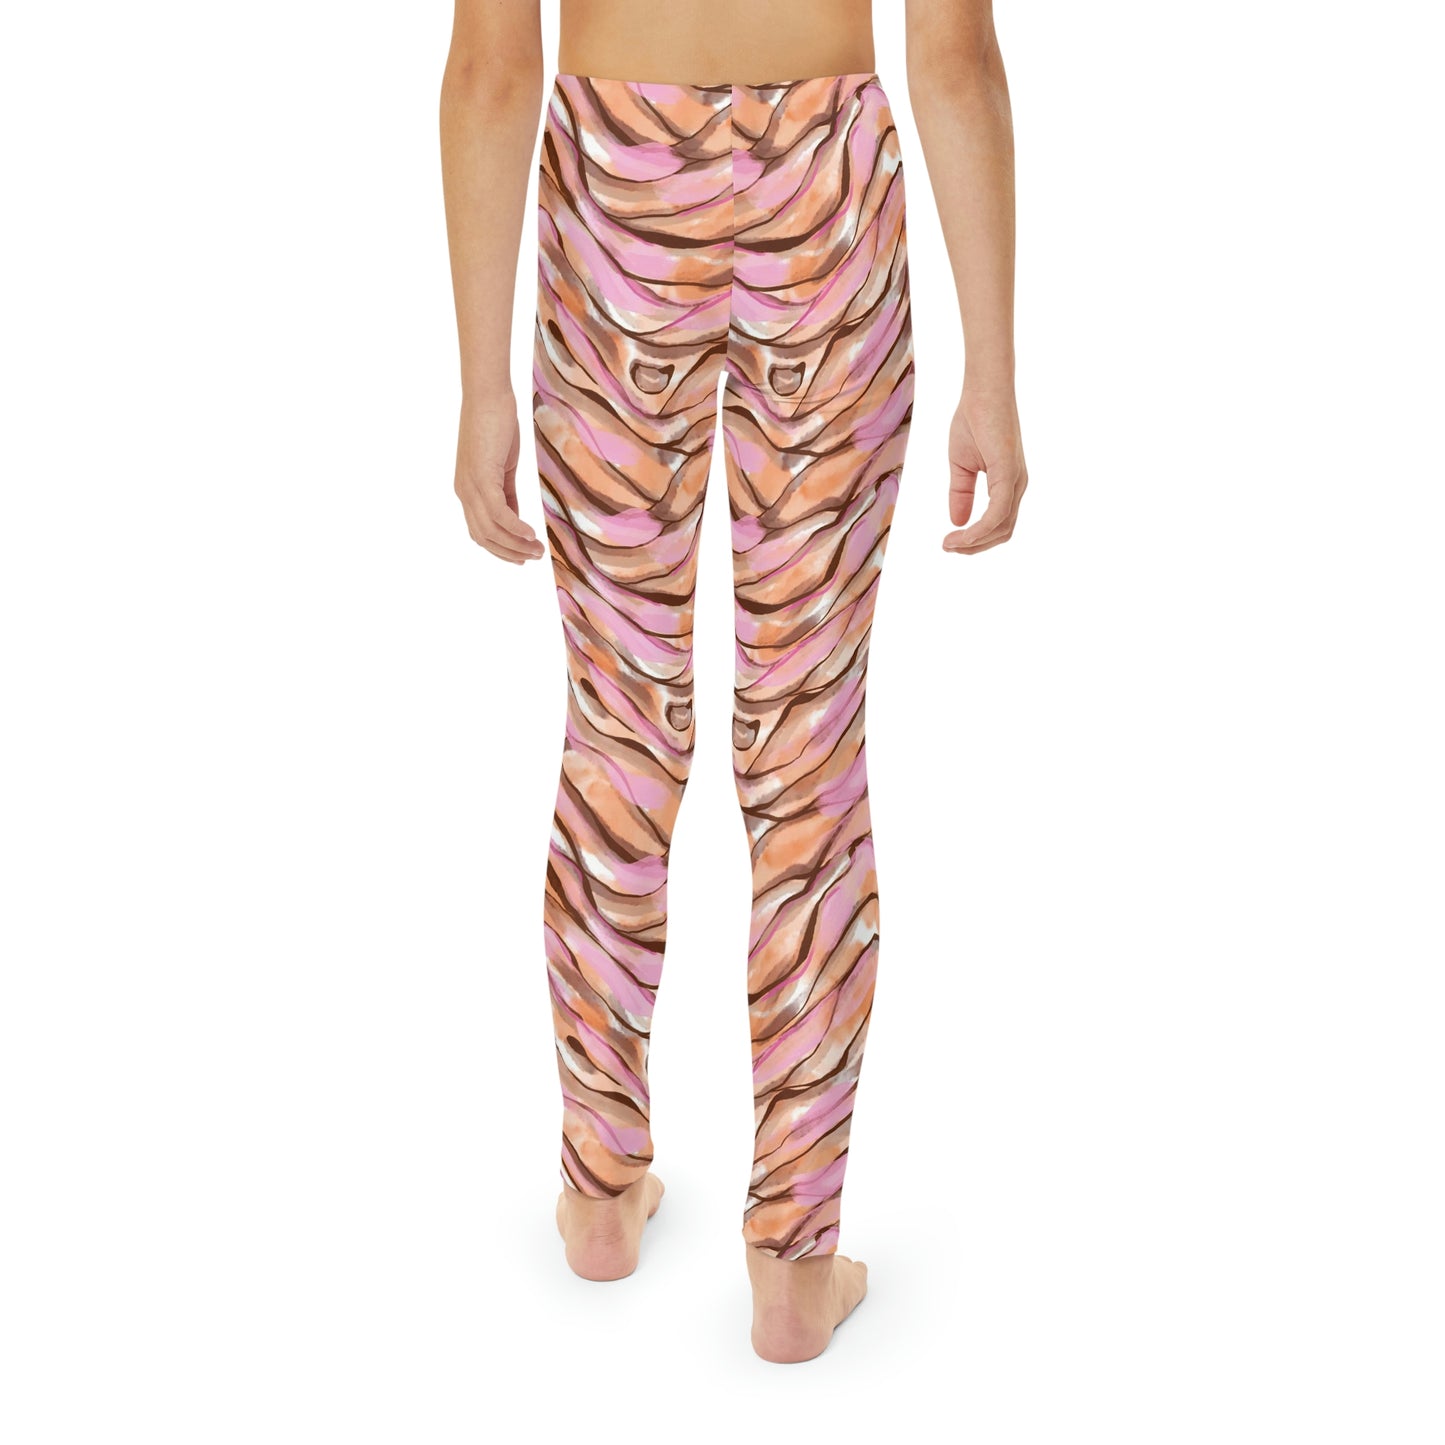 Tiger Youth Leggings,  One of a Kind Gift - Unique Workout Activewear tights for  kids Fitness , Daughter, Niece  Christmas Gift